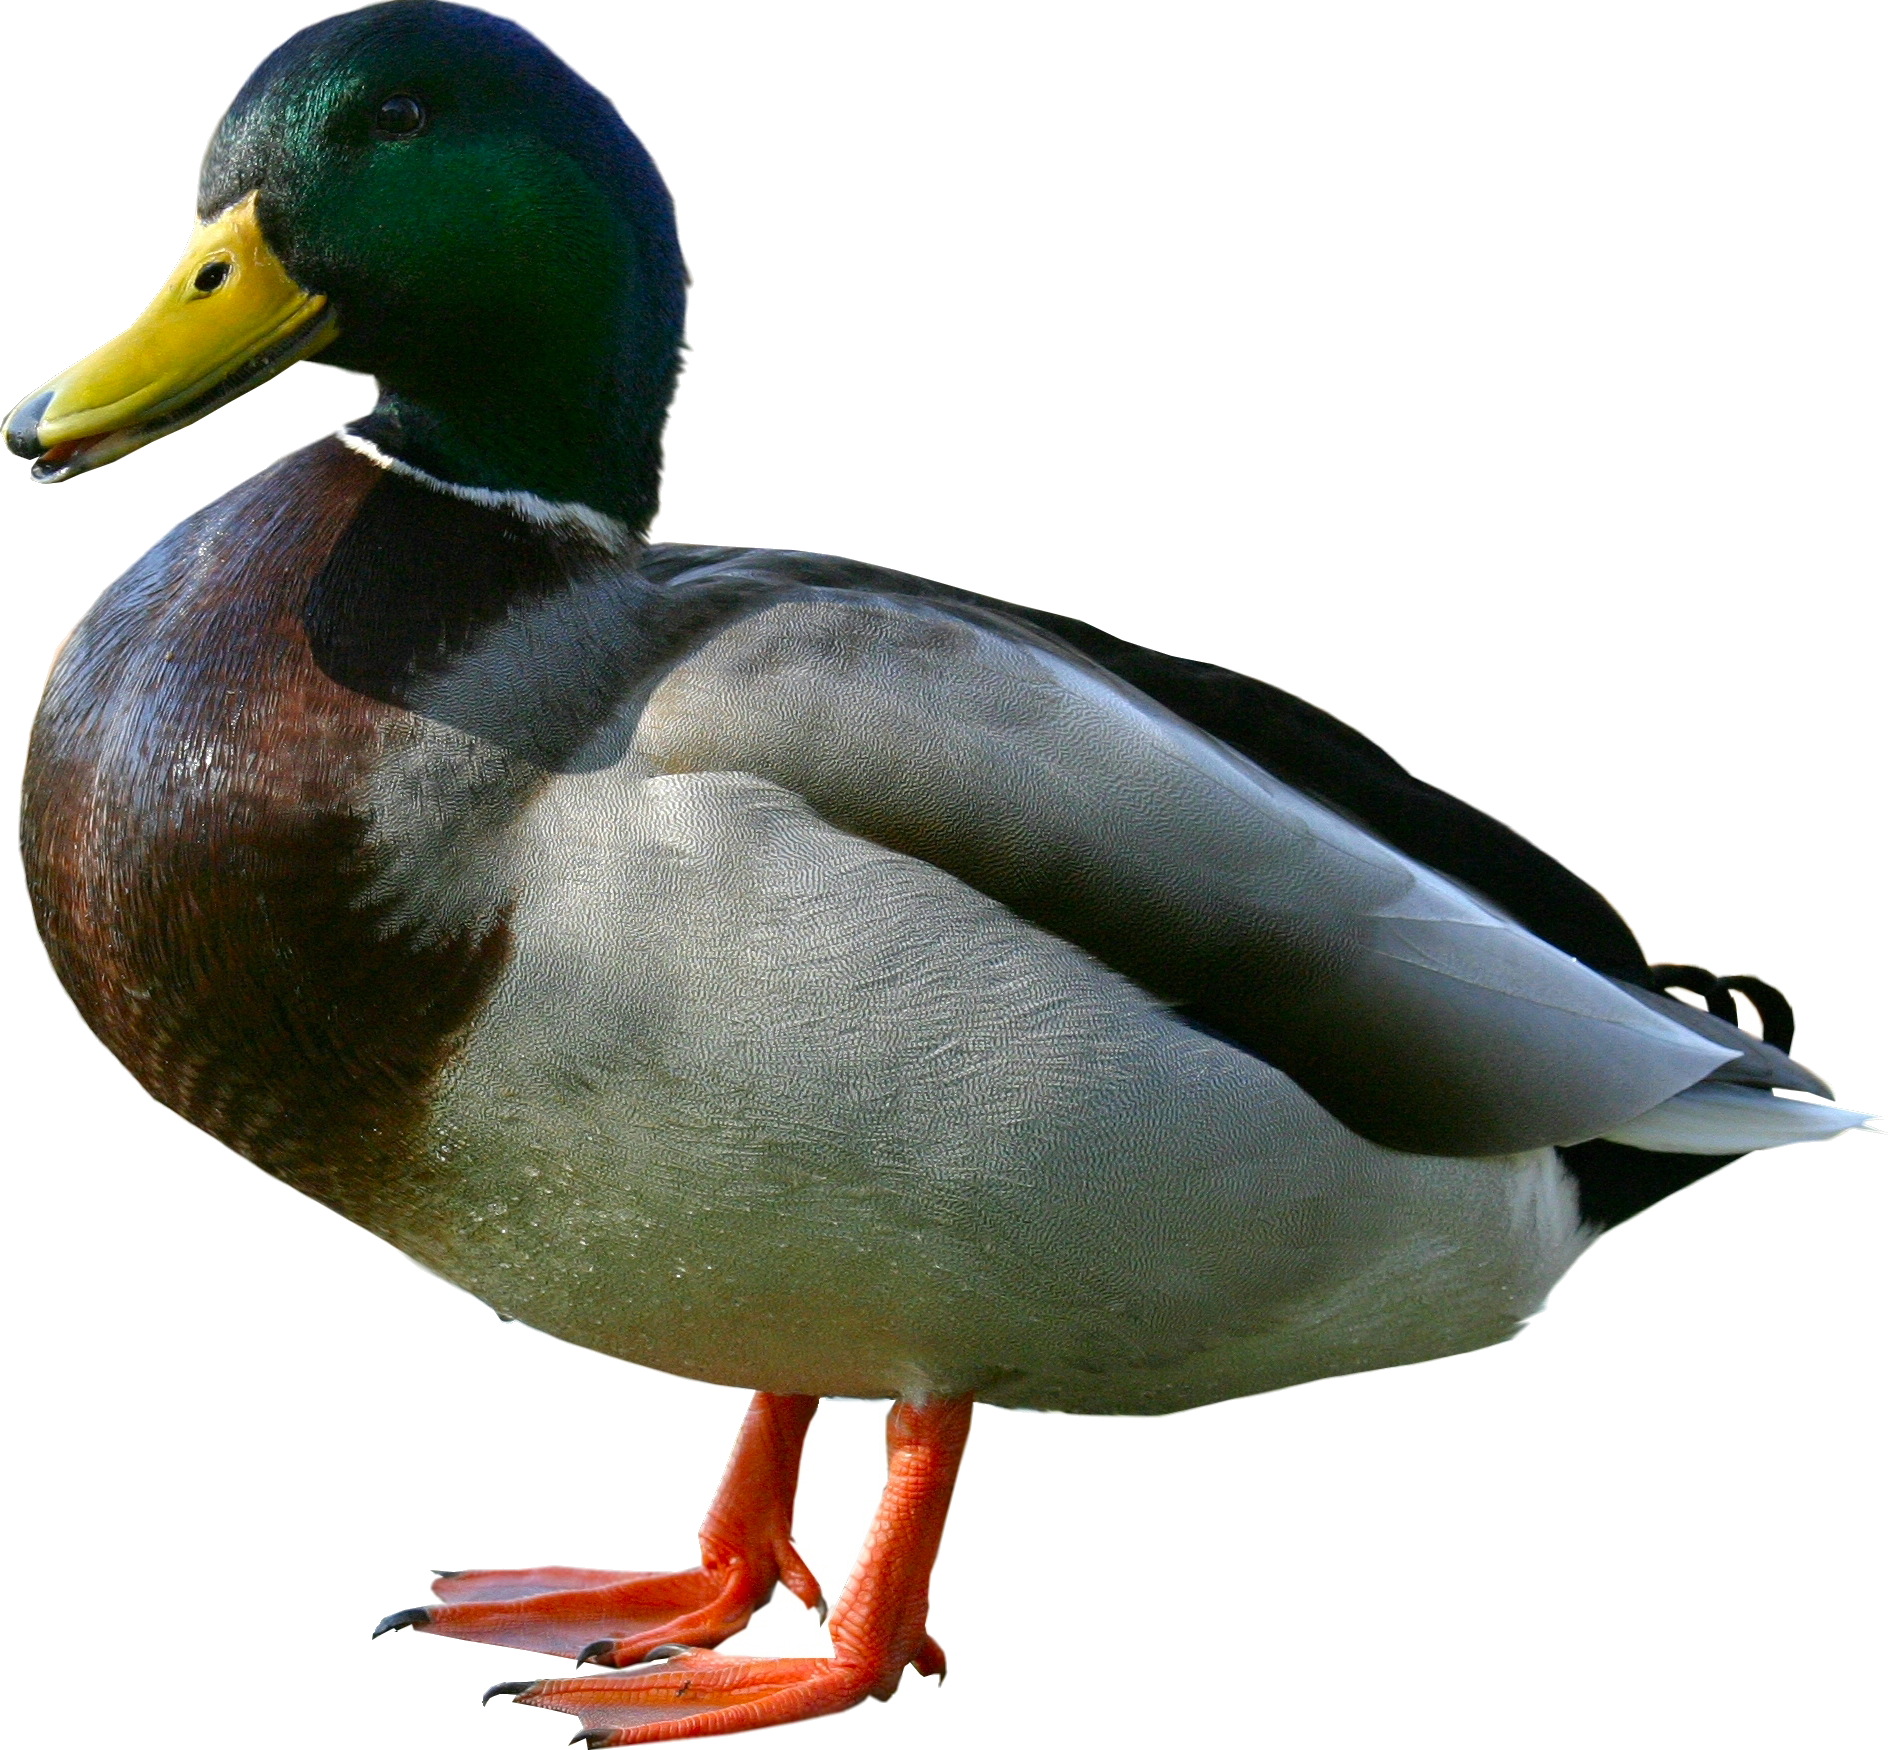 Png image free download. Clipart duck realistic